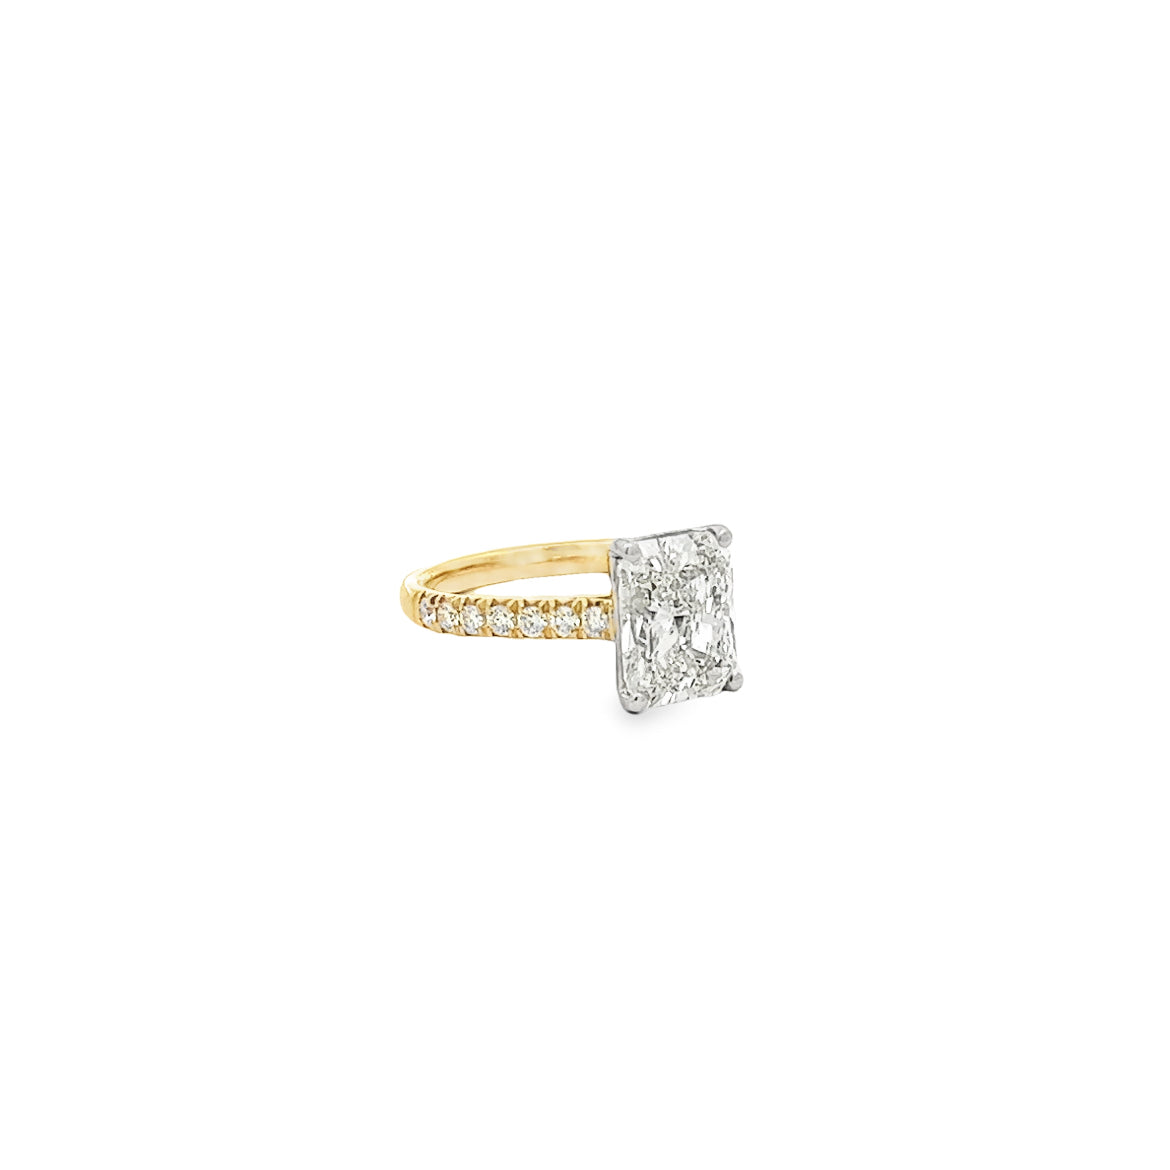 The Jewel 18k Yellow Gold Radiant Engagement Ring